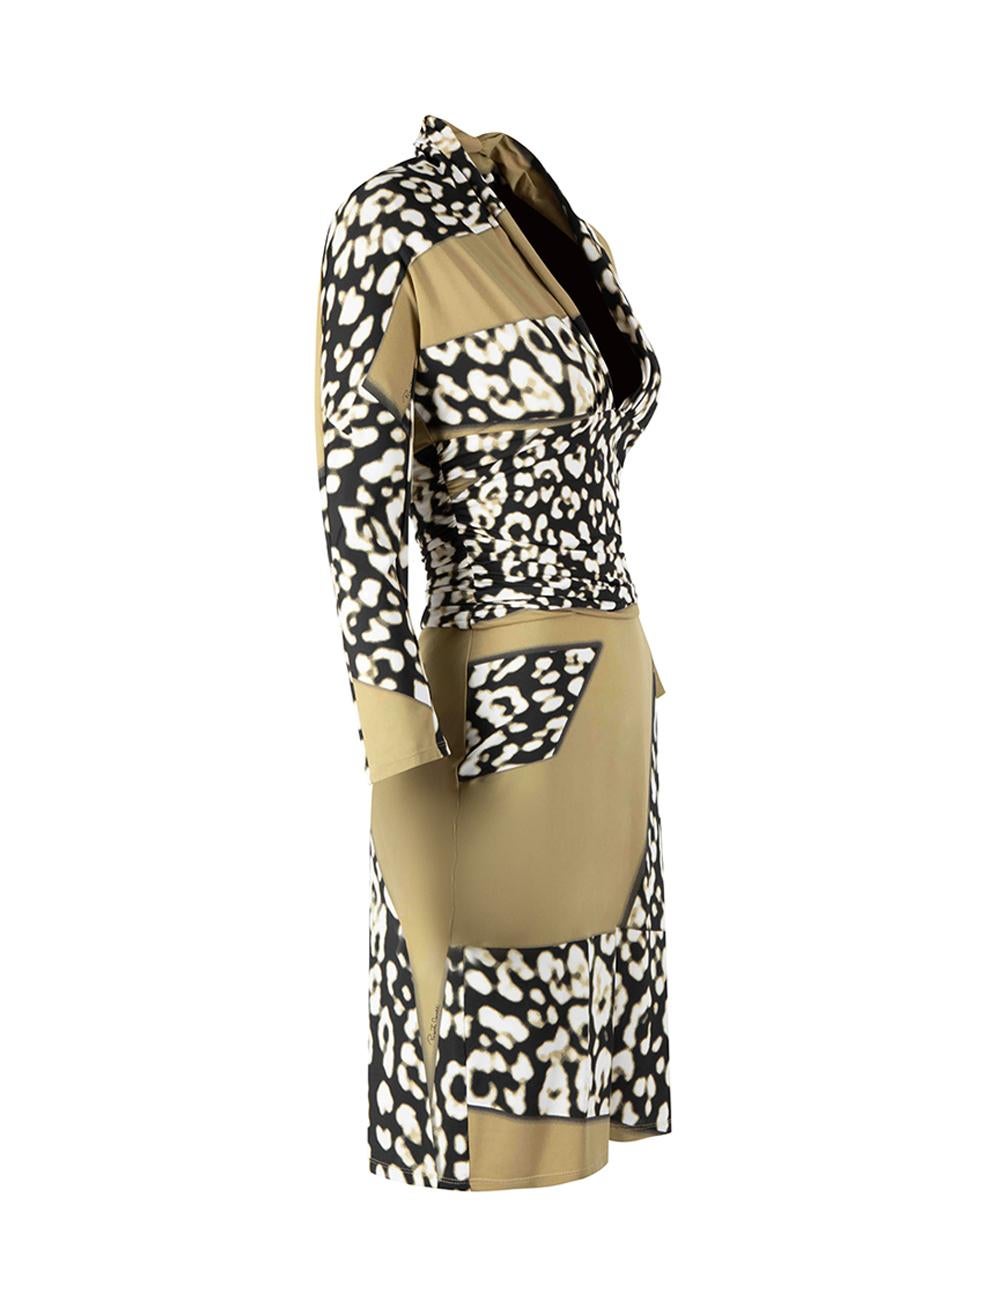 CONDITION is Very good. Hardly any visible wear to dress is evident on this used Roberto Cavalli designer resale item.




Details


Khaki

Synthetic

Knee length dress

Stretchy

Contrast animal print panel

V neckline

Side zip closure





Made